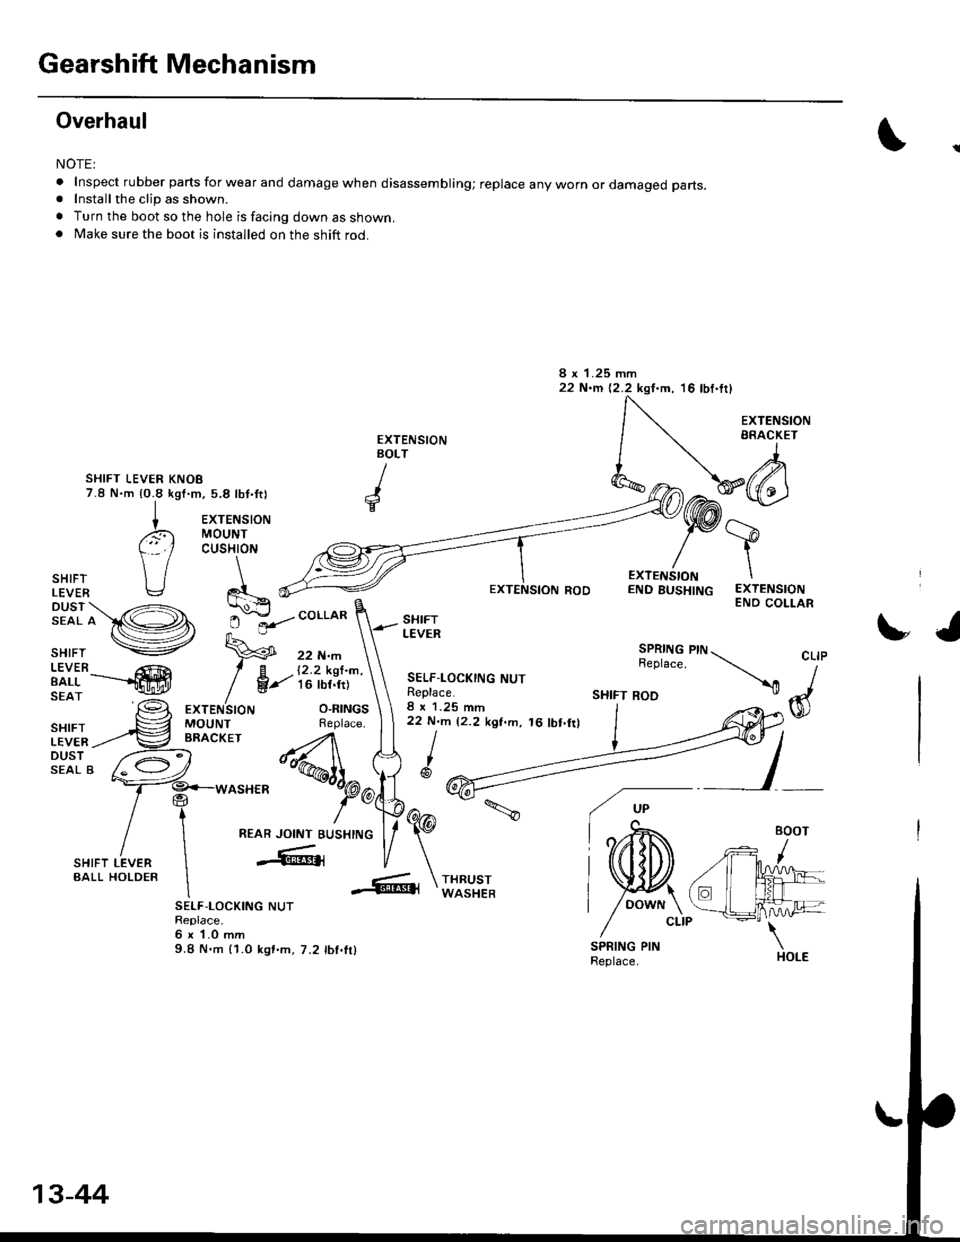 HONDA CIVIC 1999 6.G Workshop Manual Gearshift Mechanism
Overhaul
NOTE:
.Inspectrubberpartsforwearanddamagewhendisassembling;replaceanywornordamagedparts.
. Install the clip as shown.
. Turn the boot so the hole is facing down as shown..